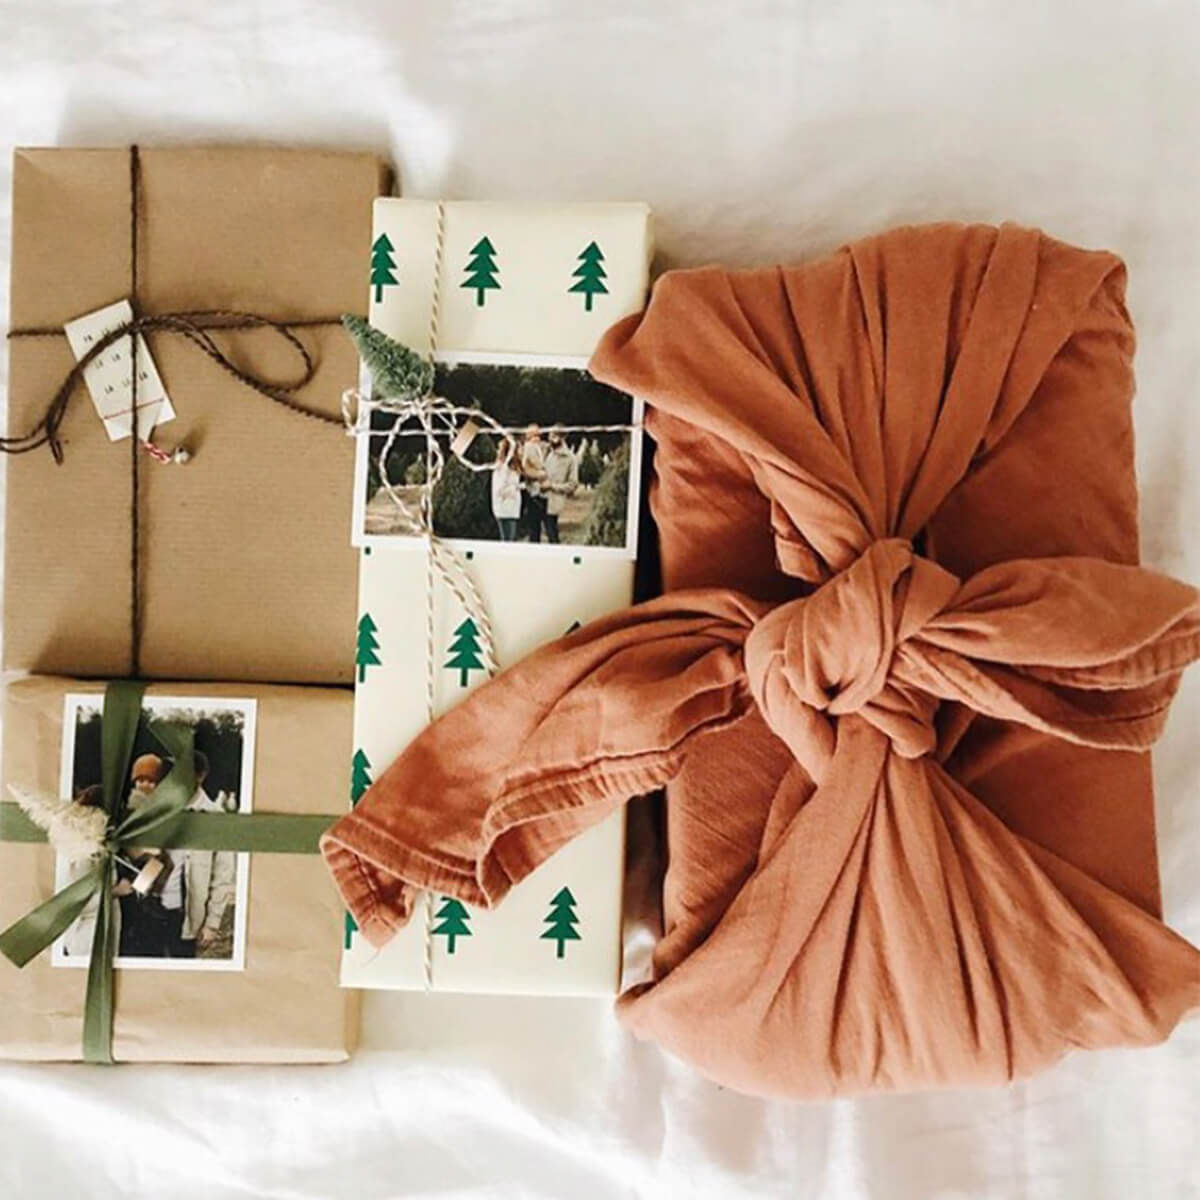 Three traditionally-wrapped gifts next to gift wrapped in tea towel